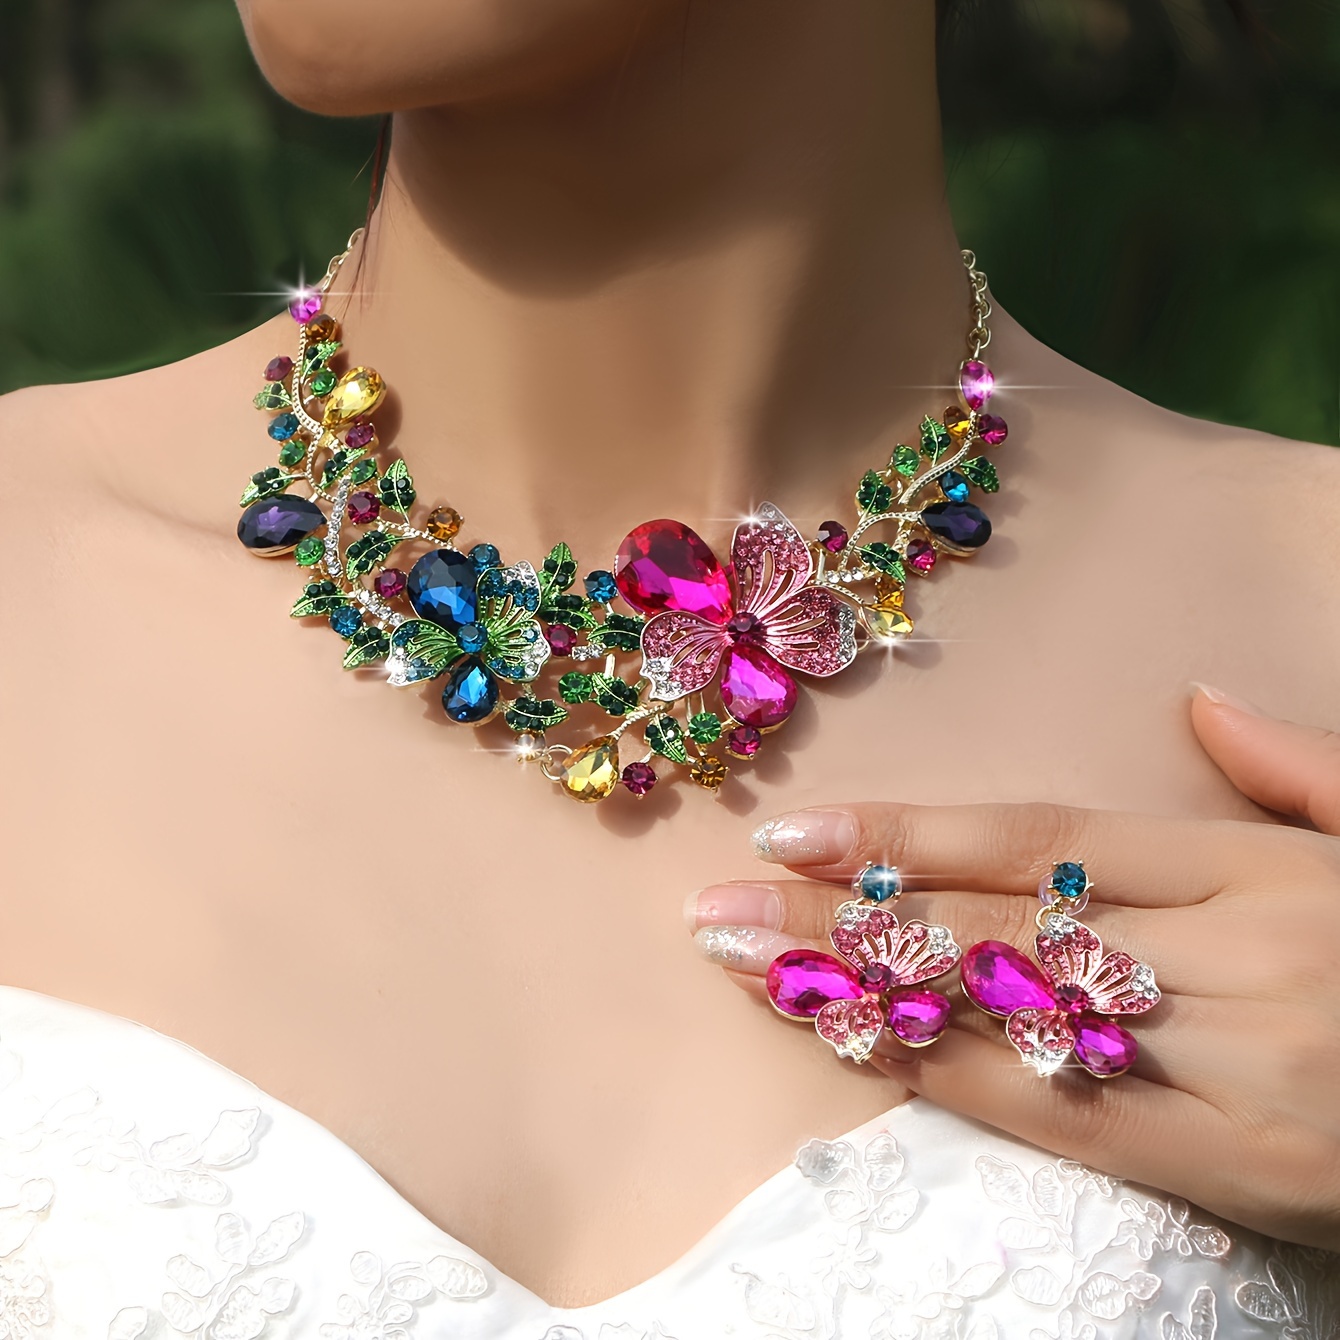 

Luxury High-shine Rhinestone Flower Colorful Necklace And Earrings Set, Bridal Wedding Jewelry, French Style Blingbling 2-piece Accessory For Banquet Events Gifts For Eid